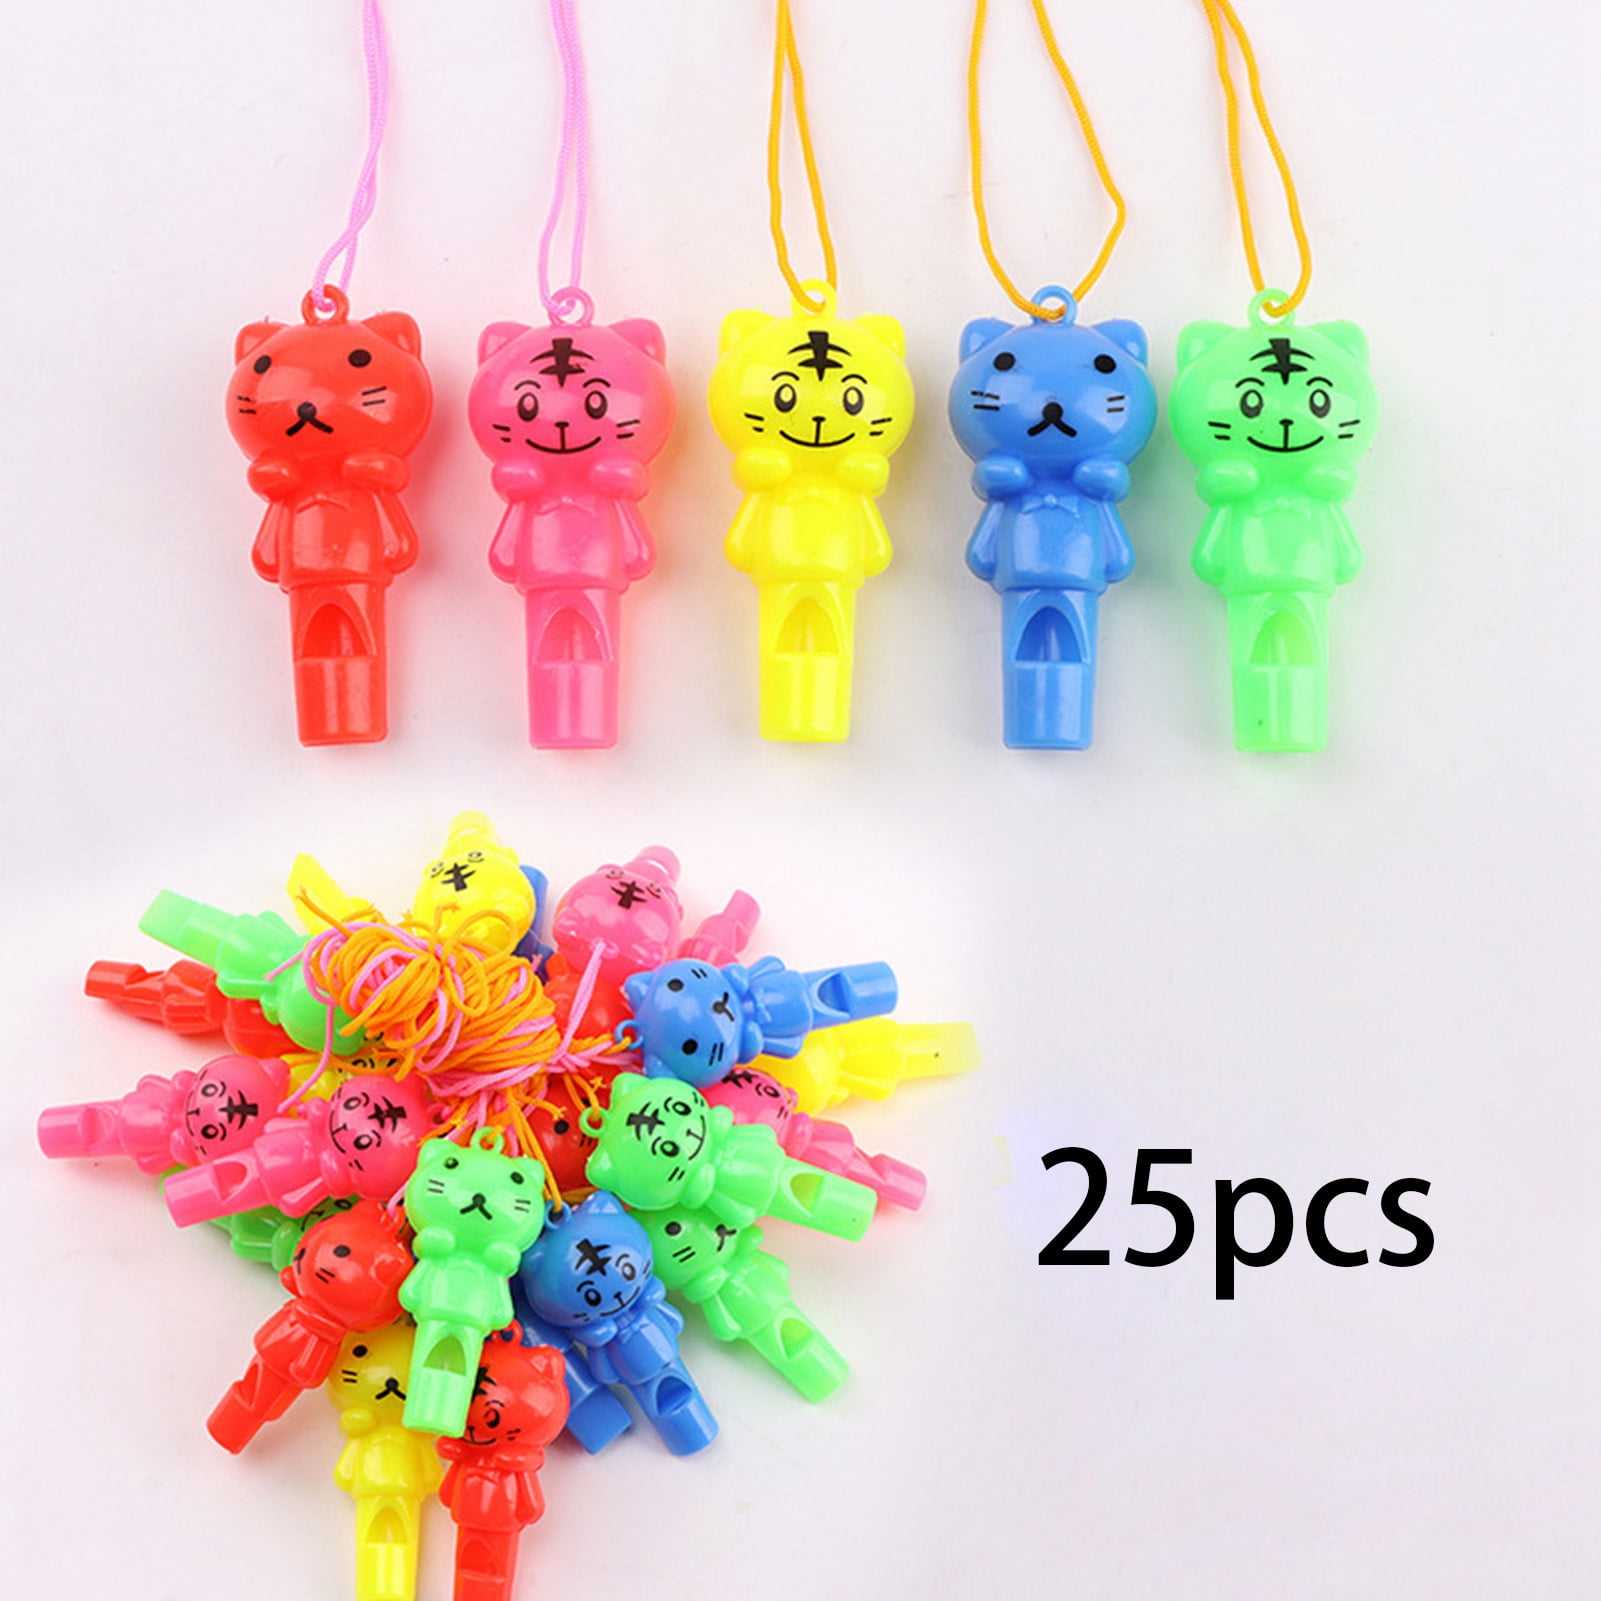 25pcs Plastic Football Whistle Referee Sports Colorful Party Favor for Kids 